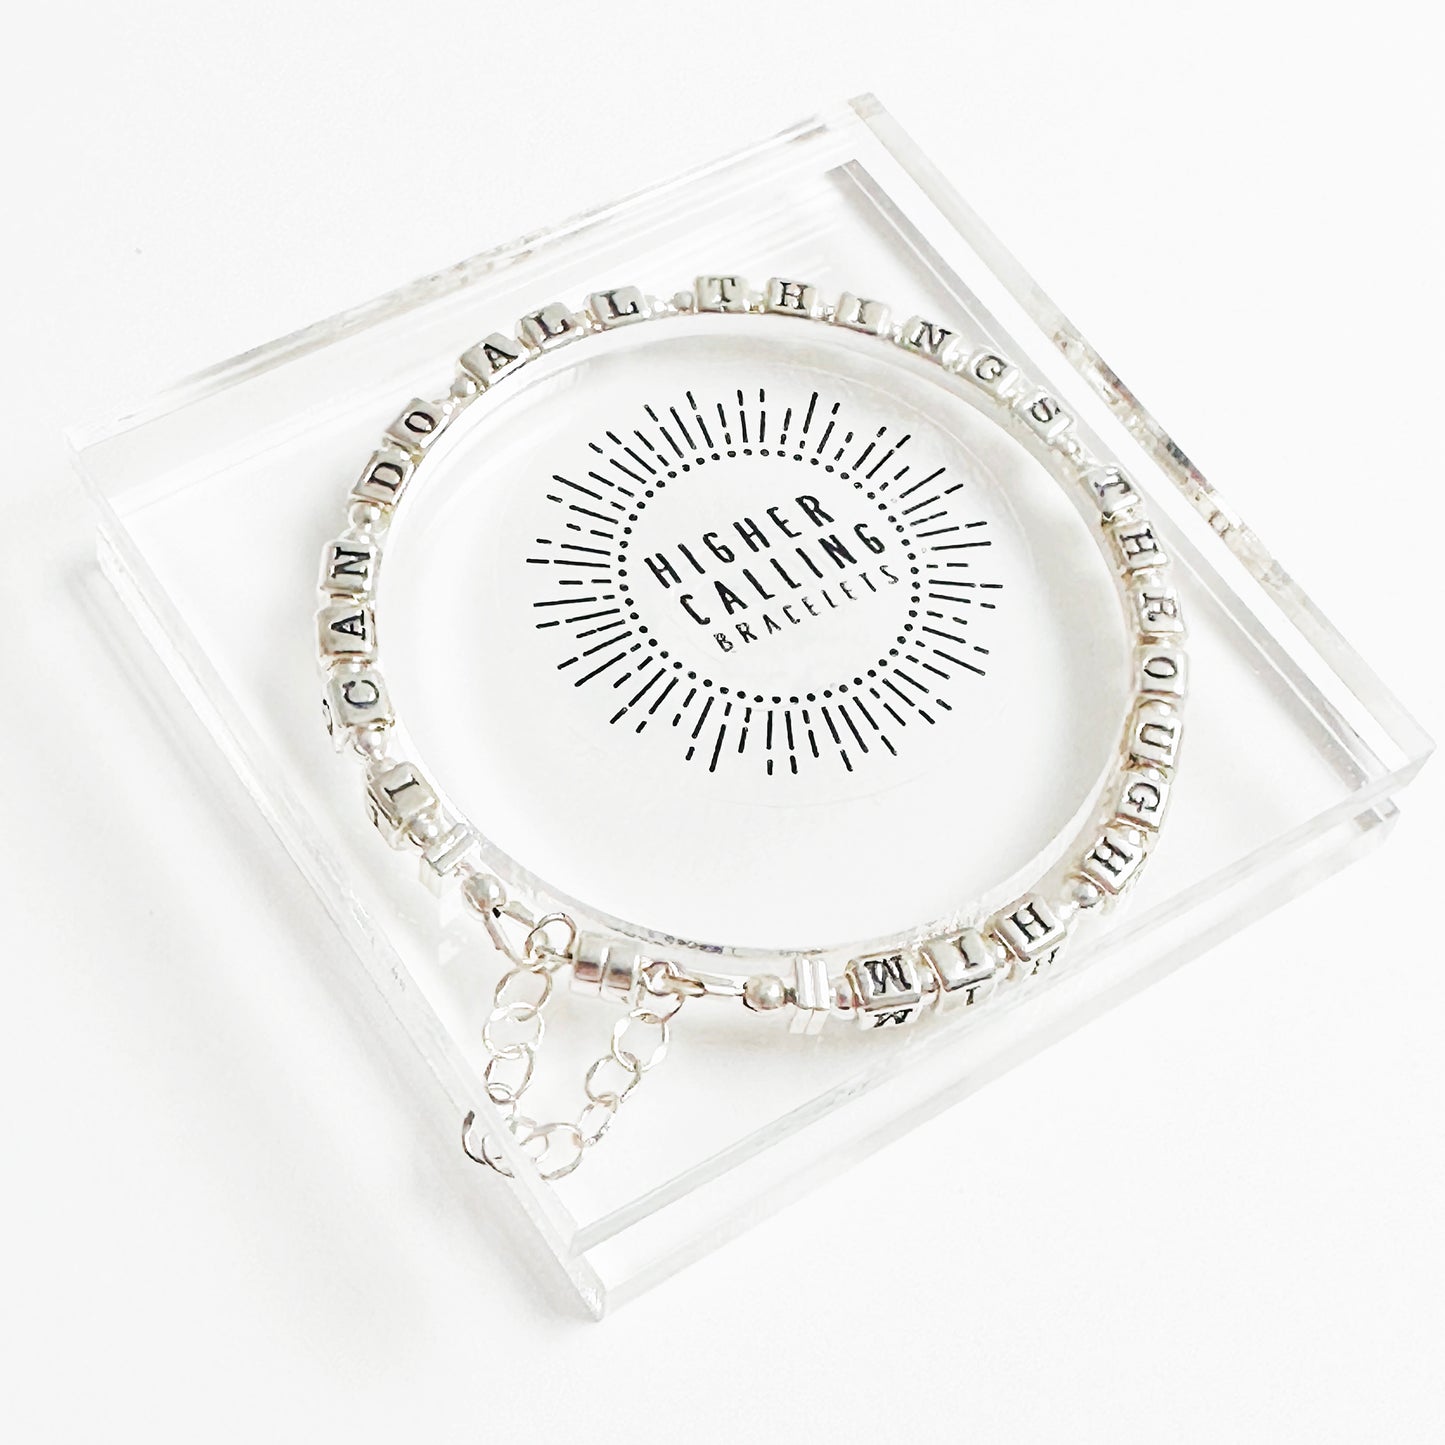 Higher Calling Bracelets package features an acrylic box display